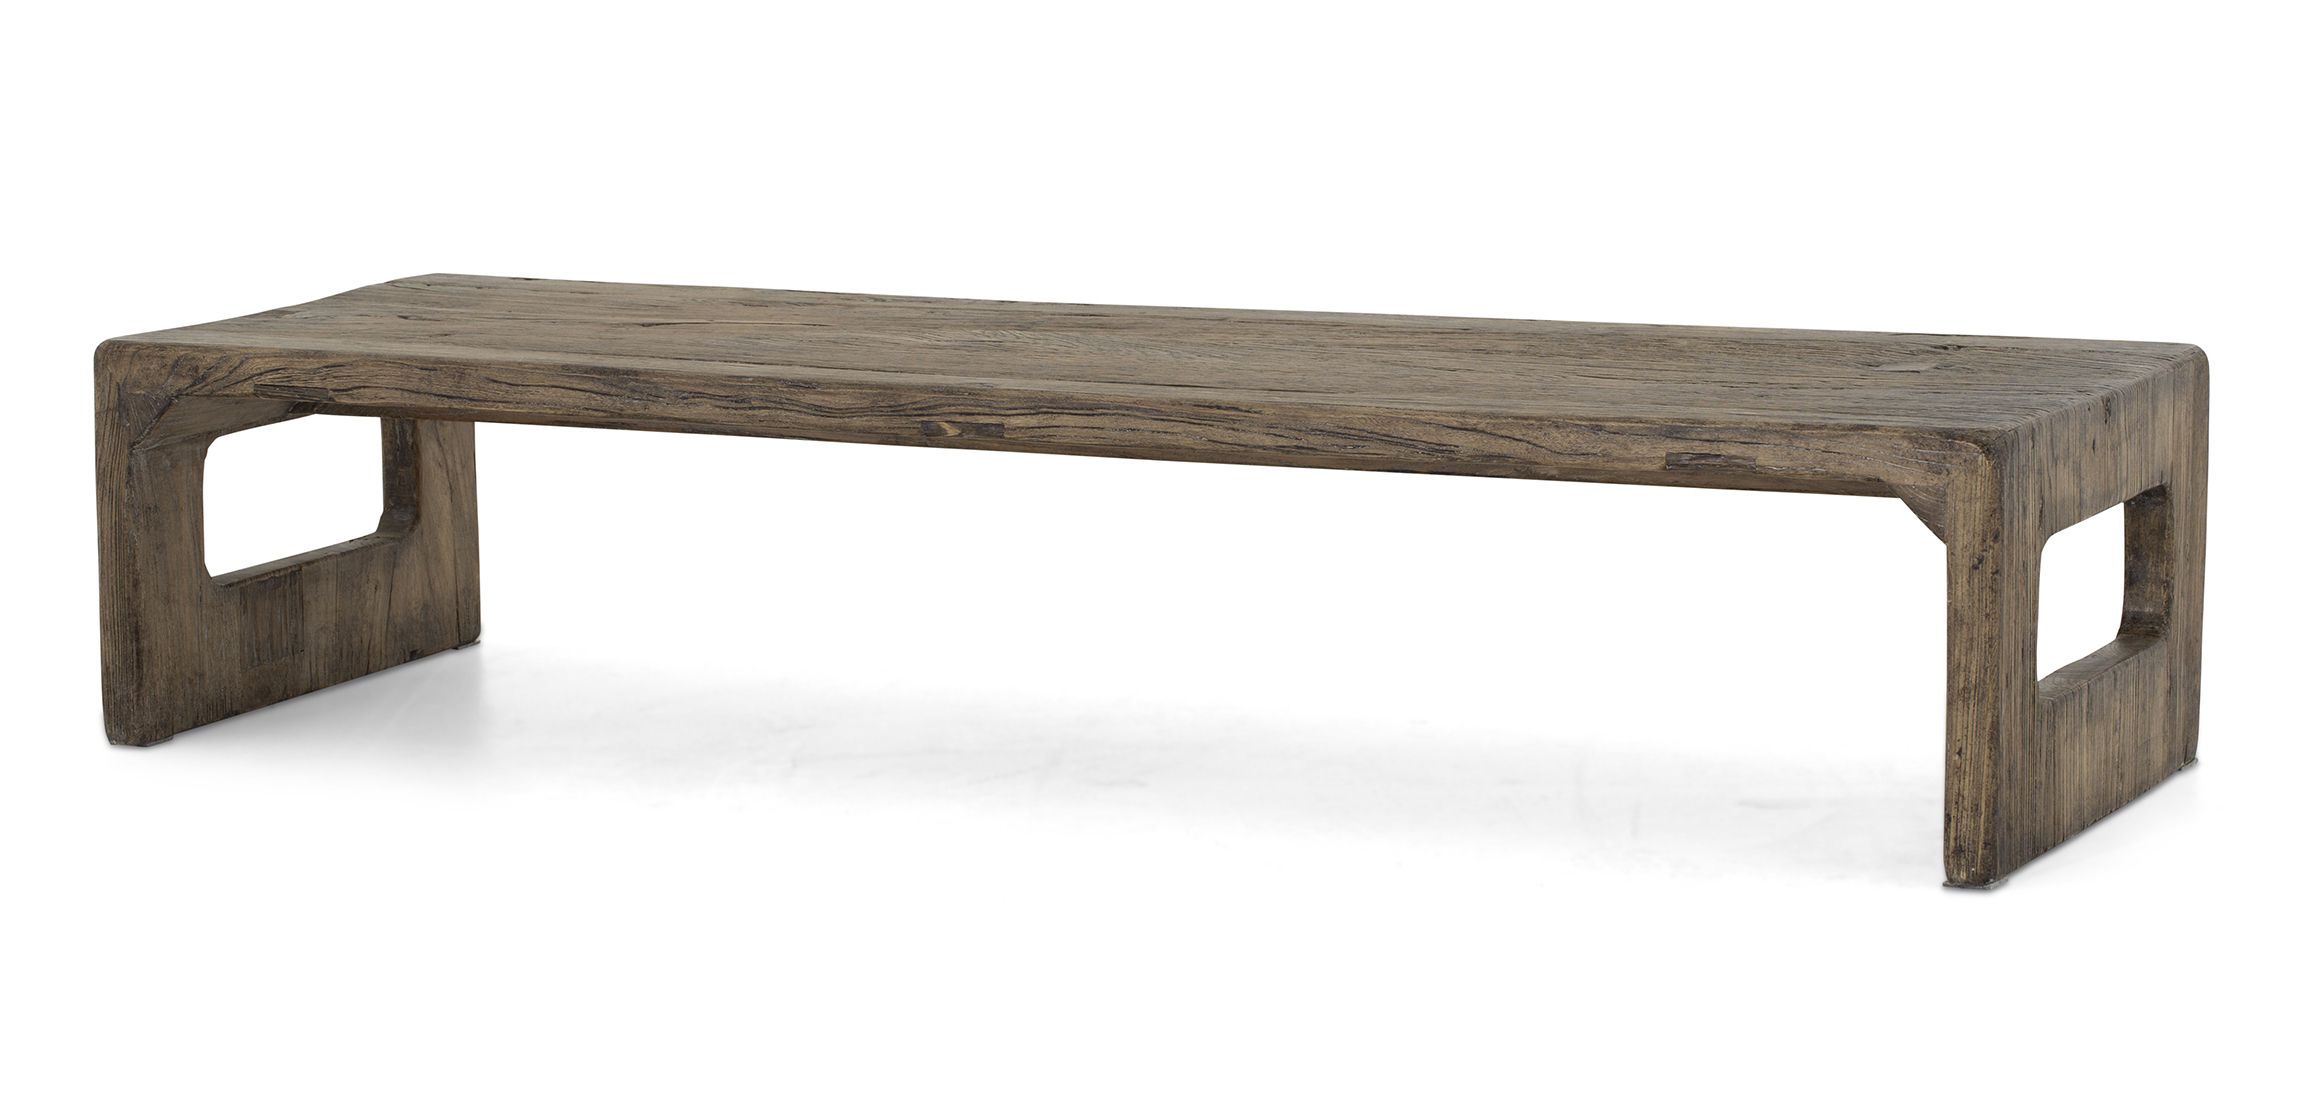 Dineen – Coffee Table, Wood (View 12 of 20)